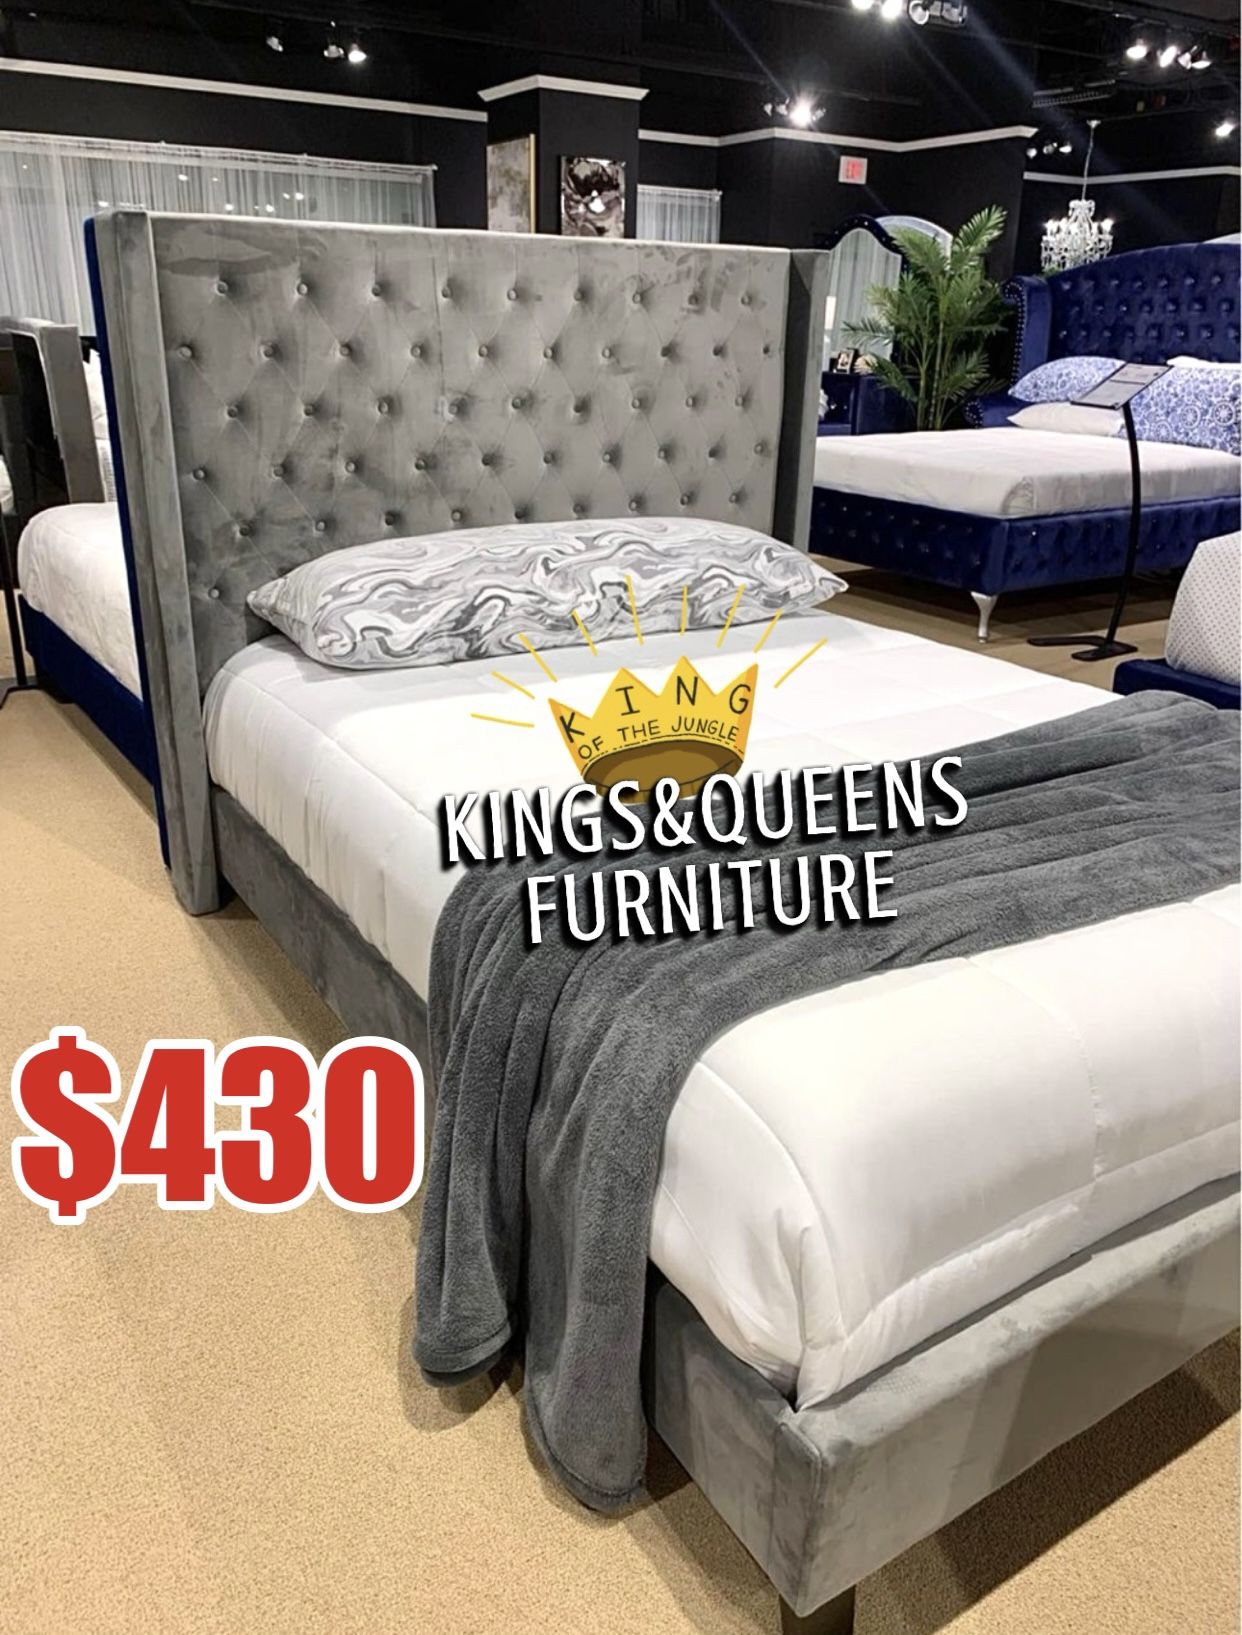 New Queen Bed Frame With Mattress $430